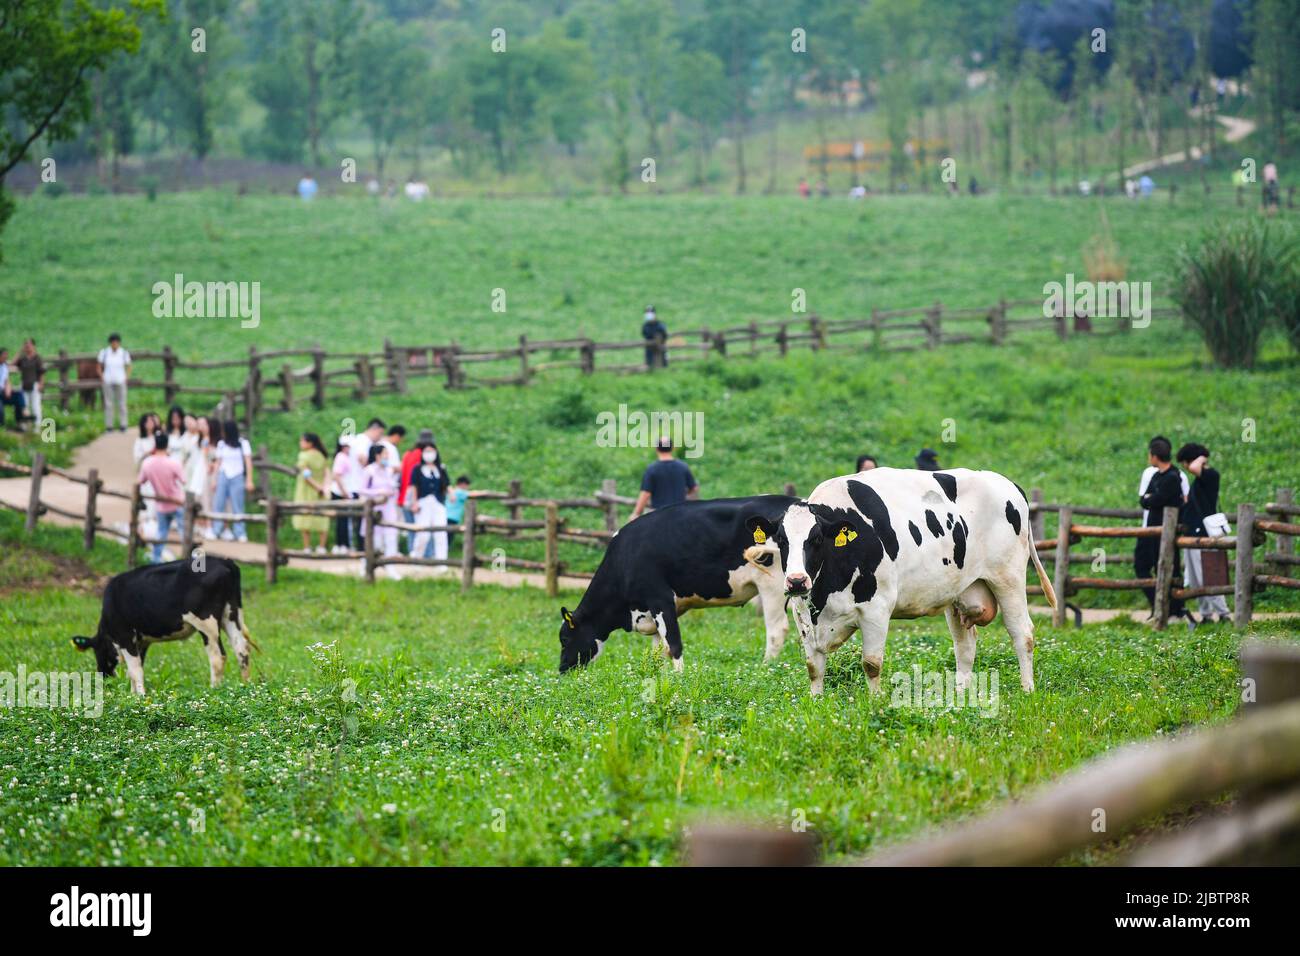 Chongqing. 5th June, 2022. Tourists visit Guangyang Isle in southwest China's Chongqing, June 5, 2022. Guangyang Isle, the largest island on the upper Yangtze River, is rich in natural resources. In recent years, a series of measures have been taken to restore the island's ecological environment, attracting tourists to its colorful fields. Credit: Wang Quanchao/Xinhua/Alamy Live News Stock Photo